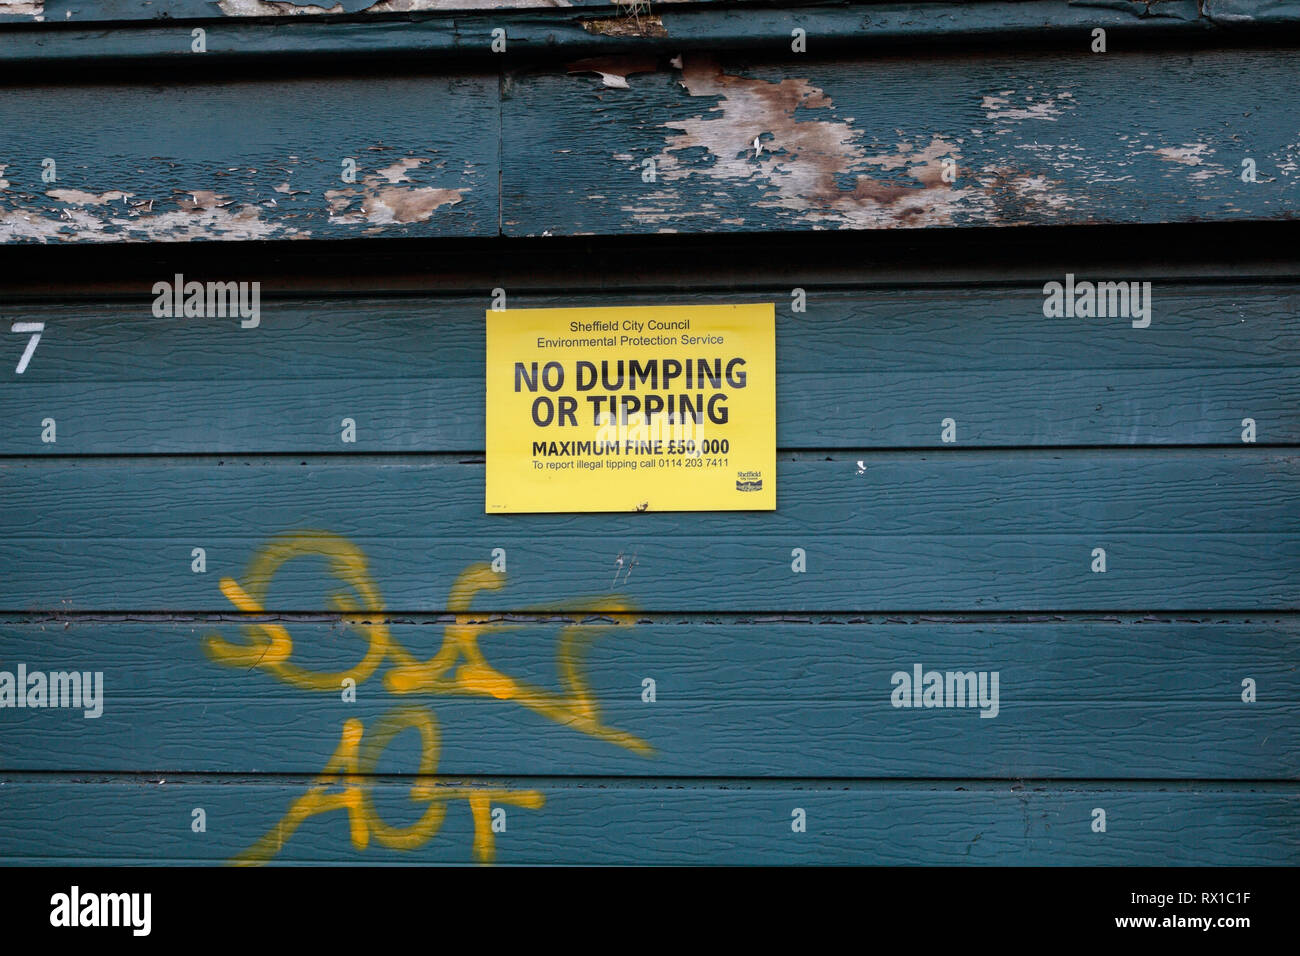 No dumping or tipping sign on garage door Stock Photo